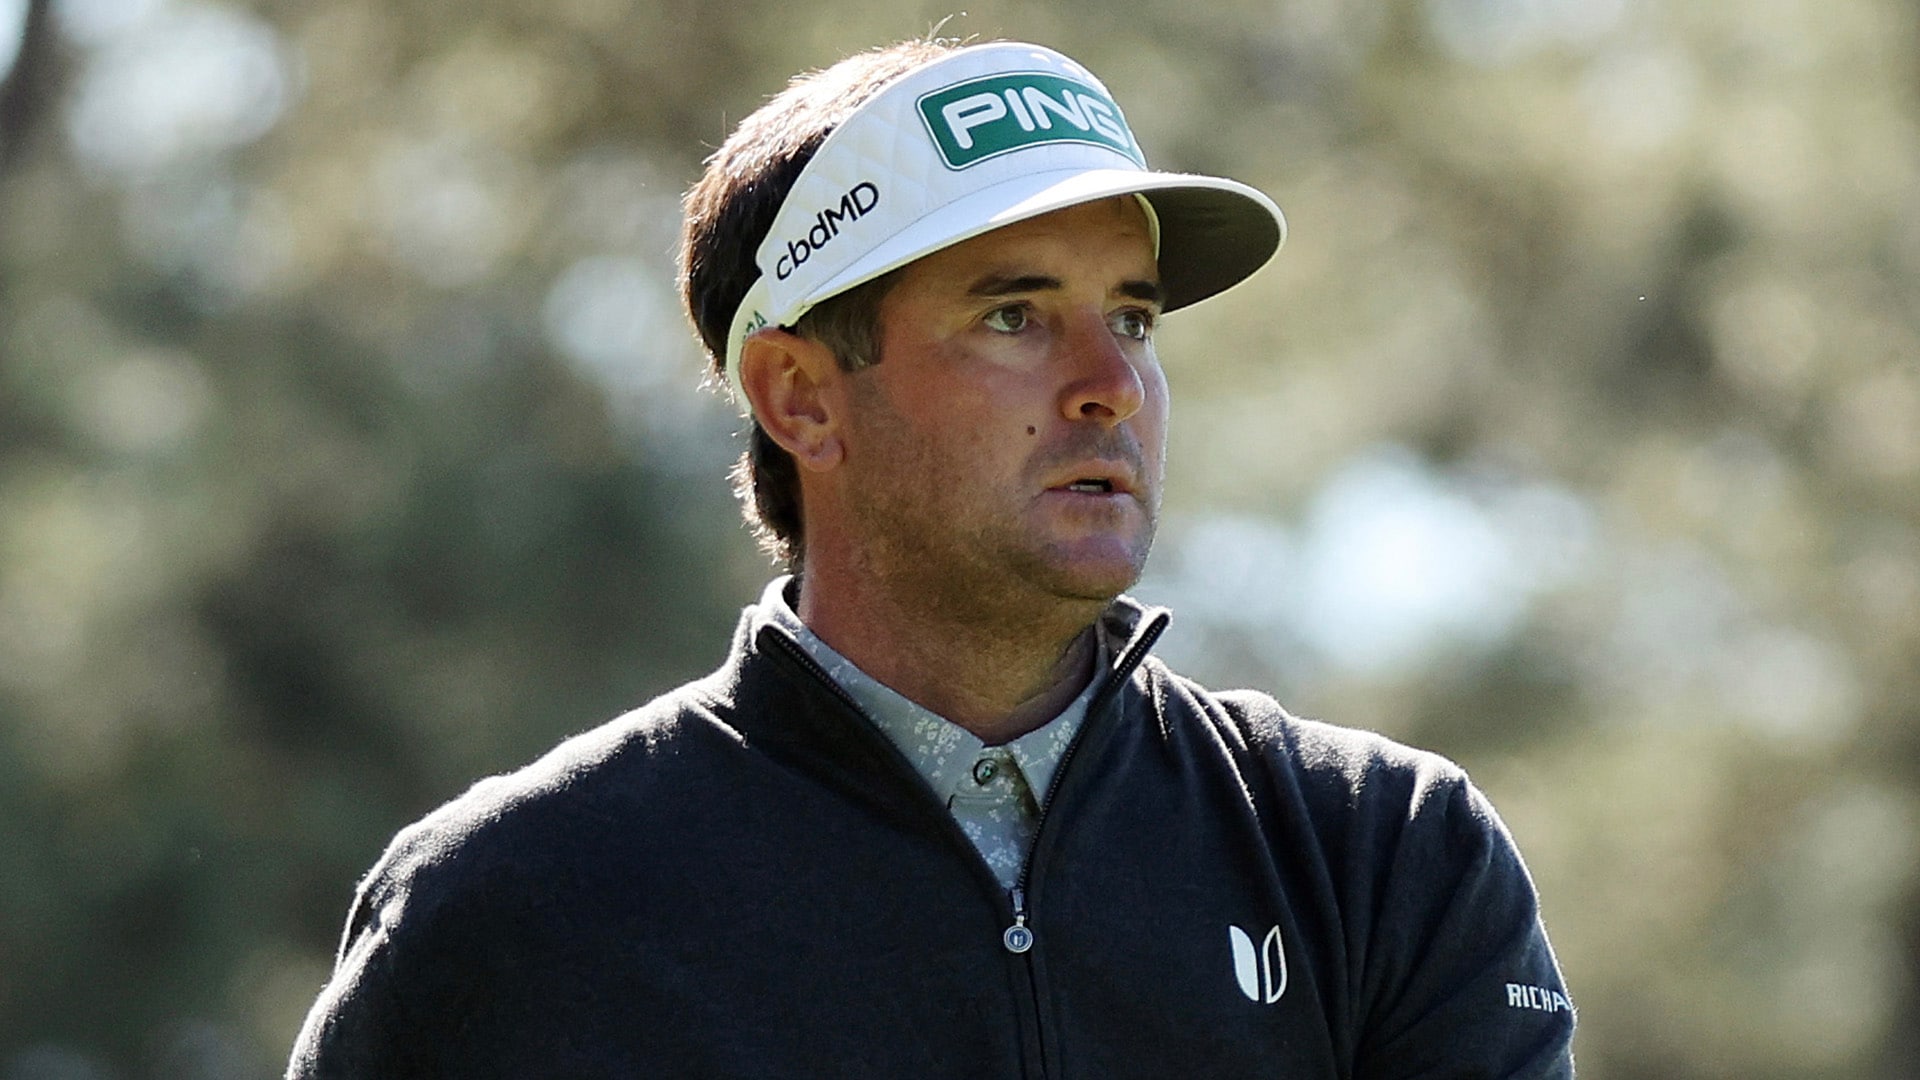 Watch: Bubba Watson again hits spectacular shot in Augusta National’s pine straw